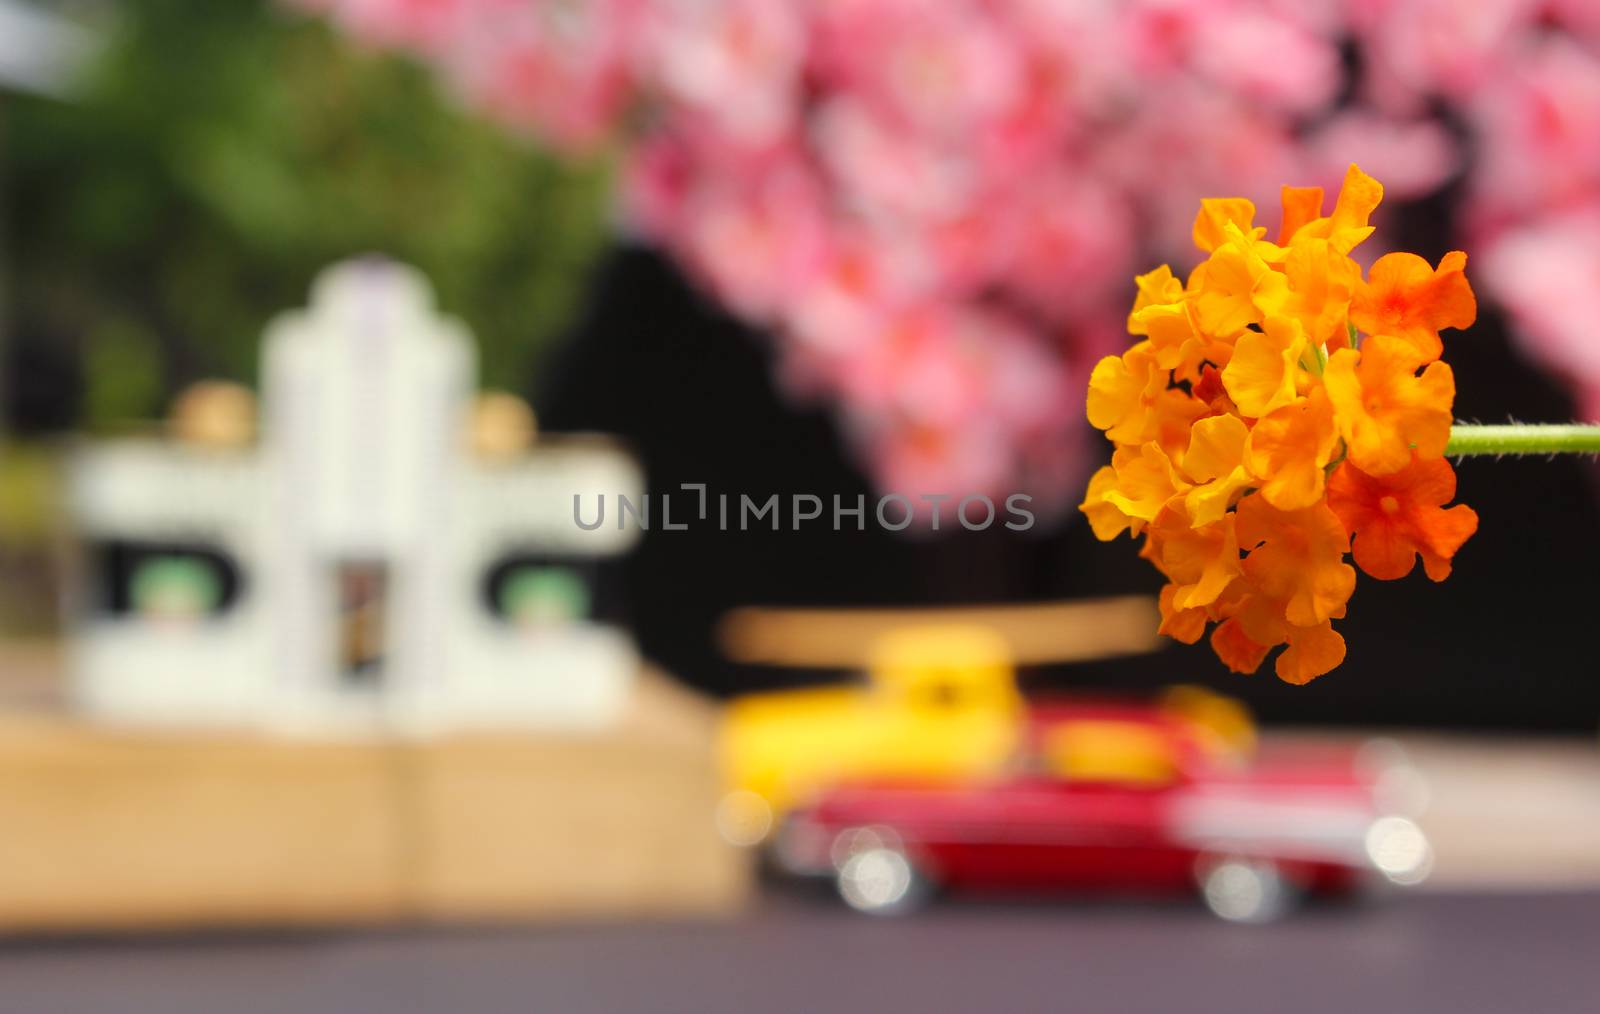 Flowers Closeup with Vintage Diner and Hot Rods in background. Small Town Concept